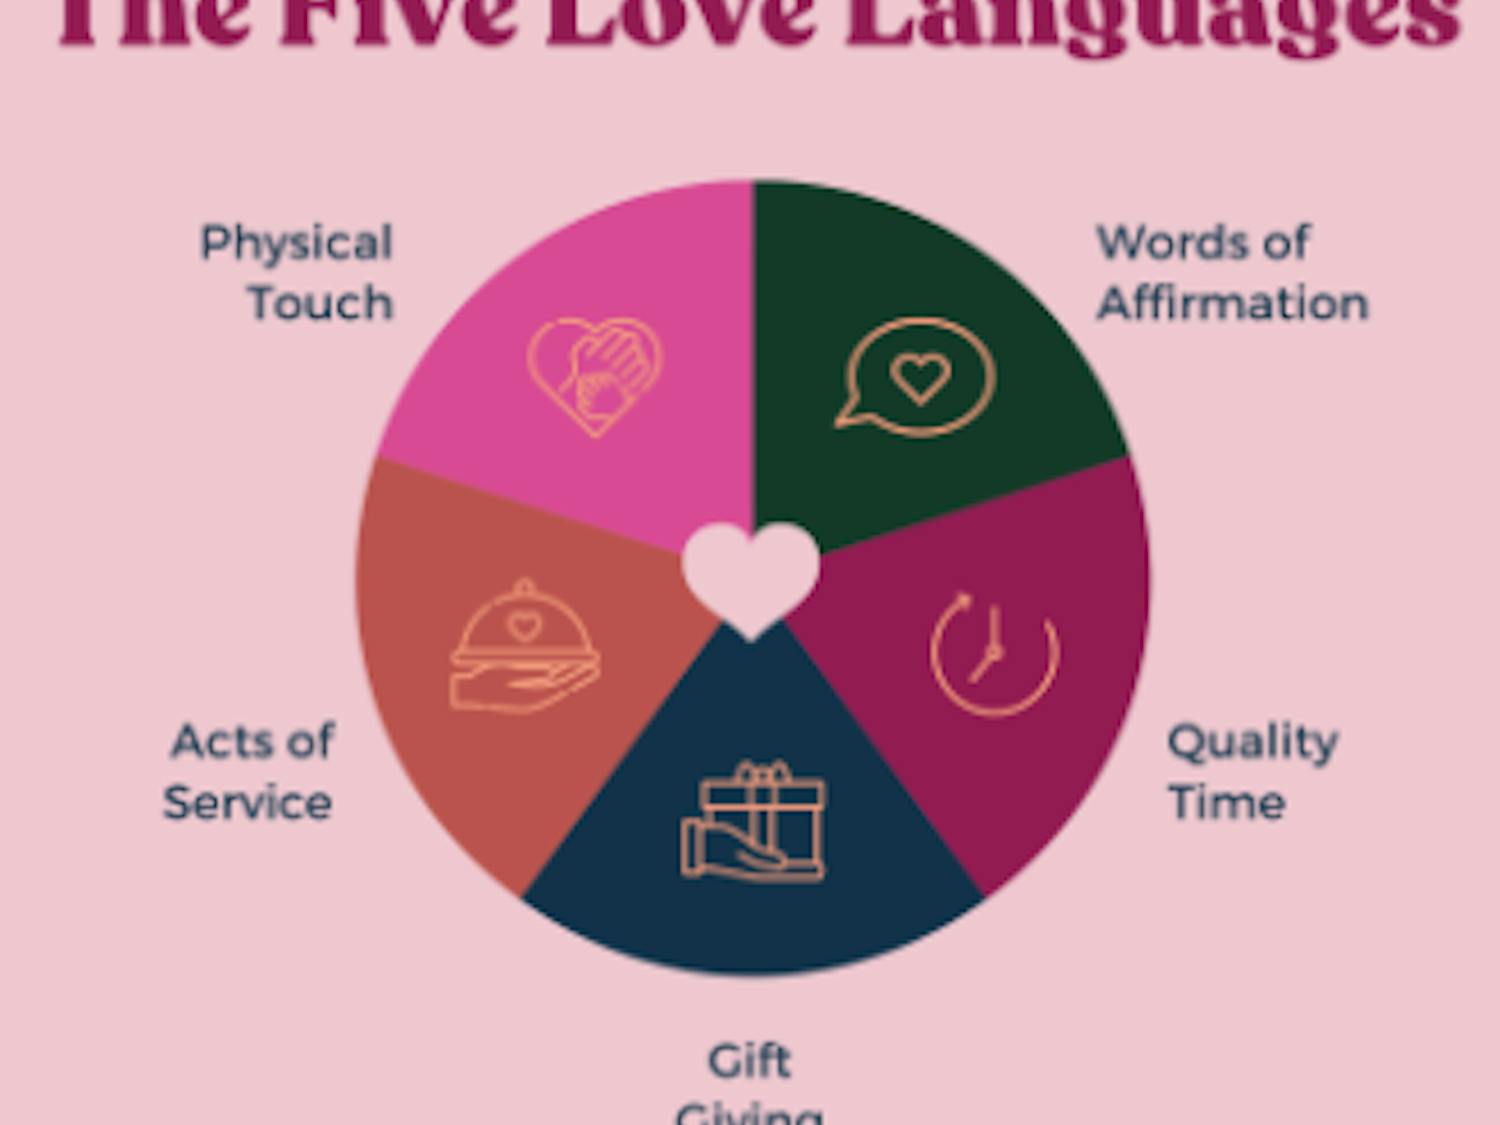 4 types of love